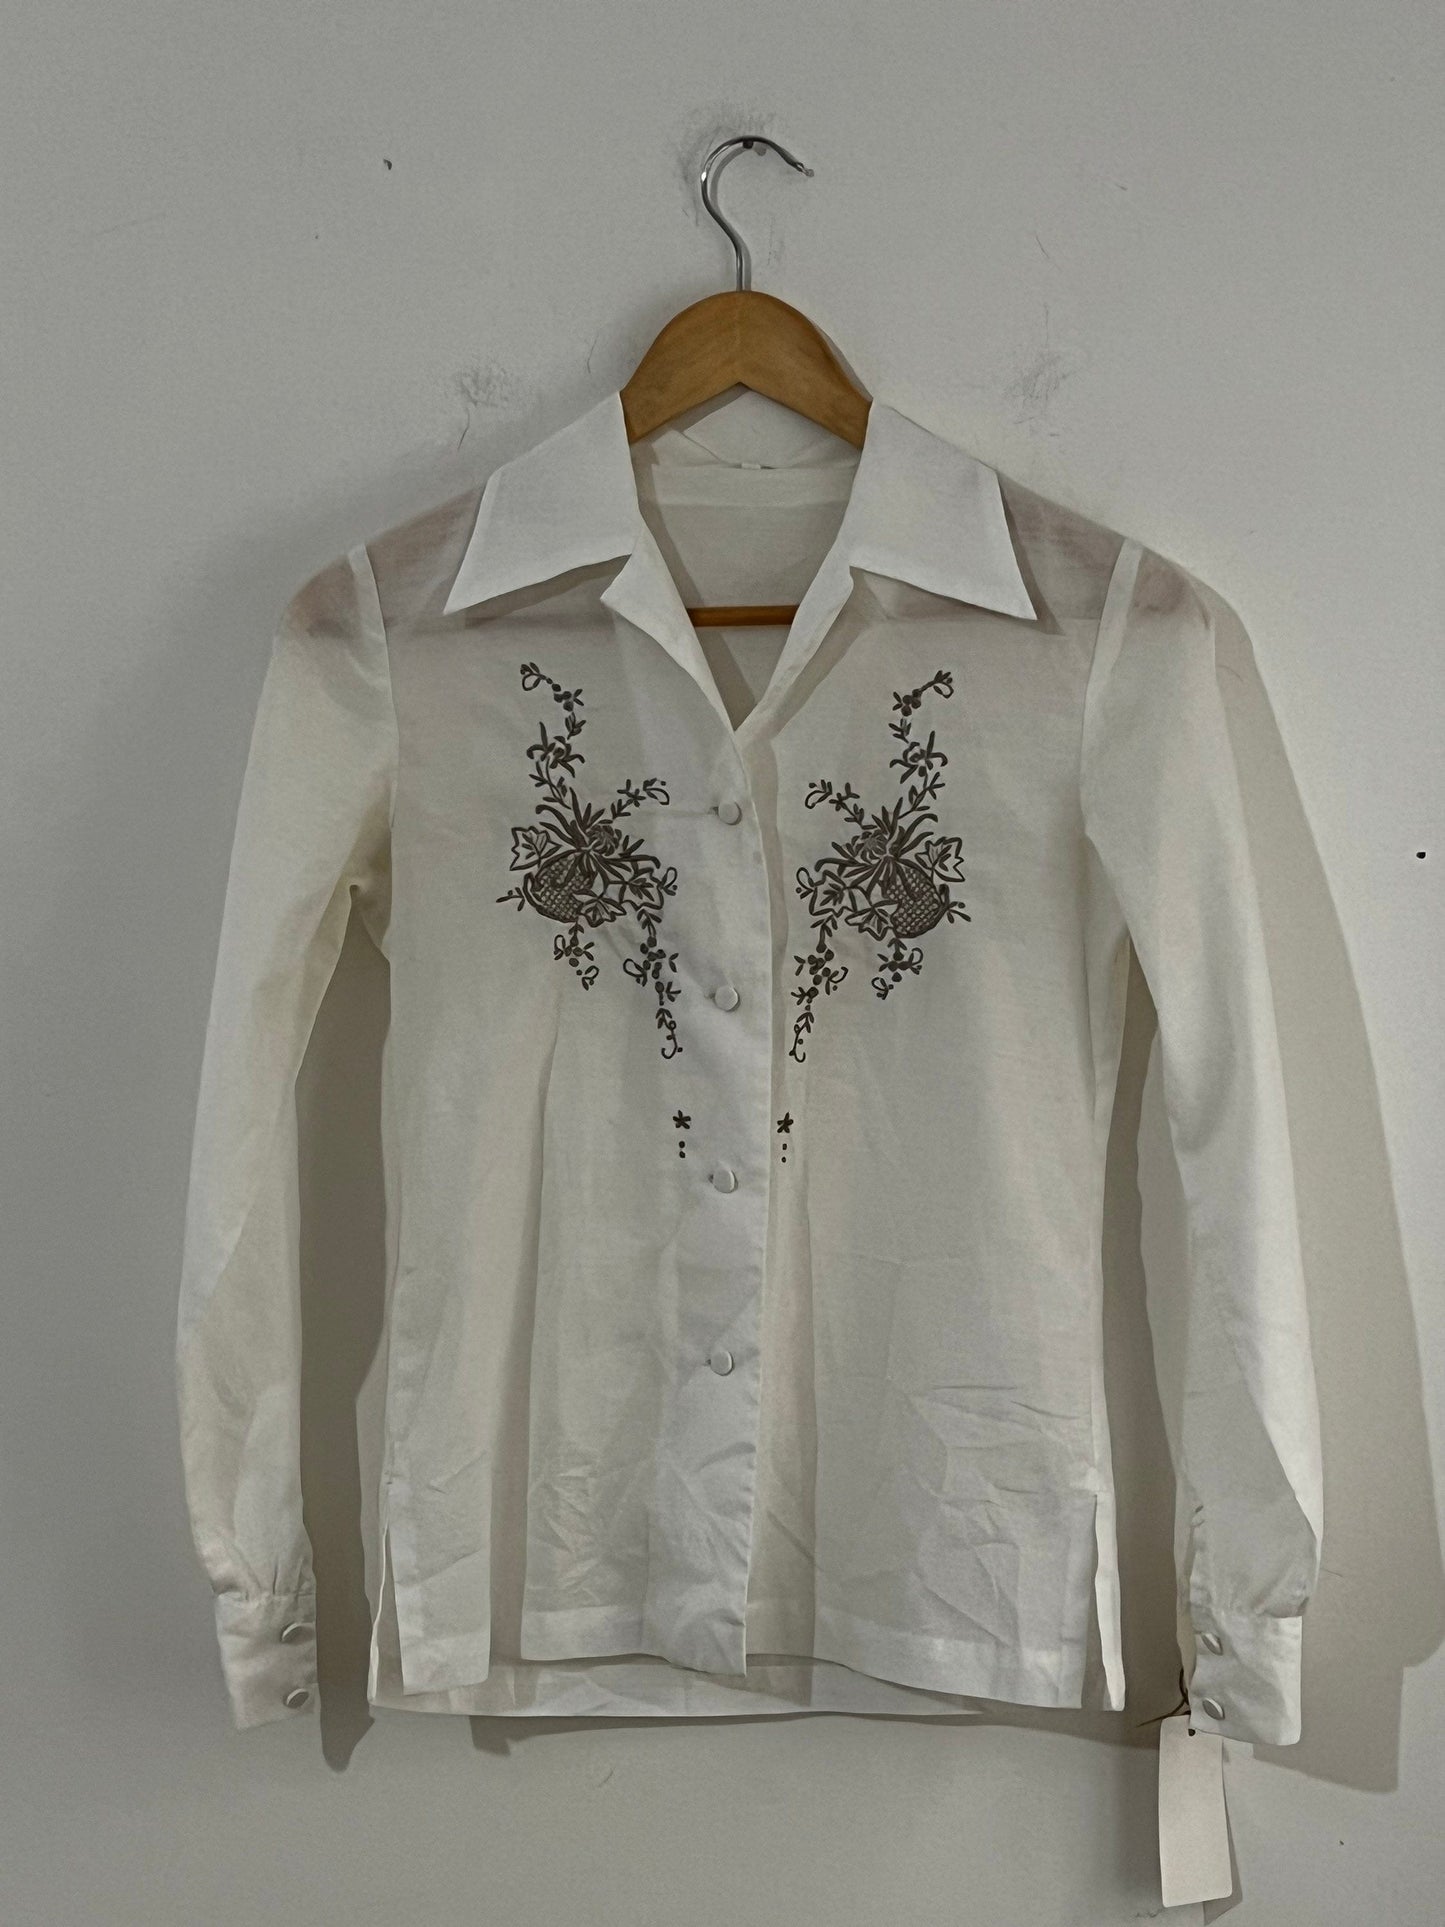 Vintage White Hand Embroidered Blouse Length off white with mushroom brown floral embroidery UK Size 8